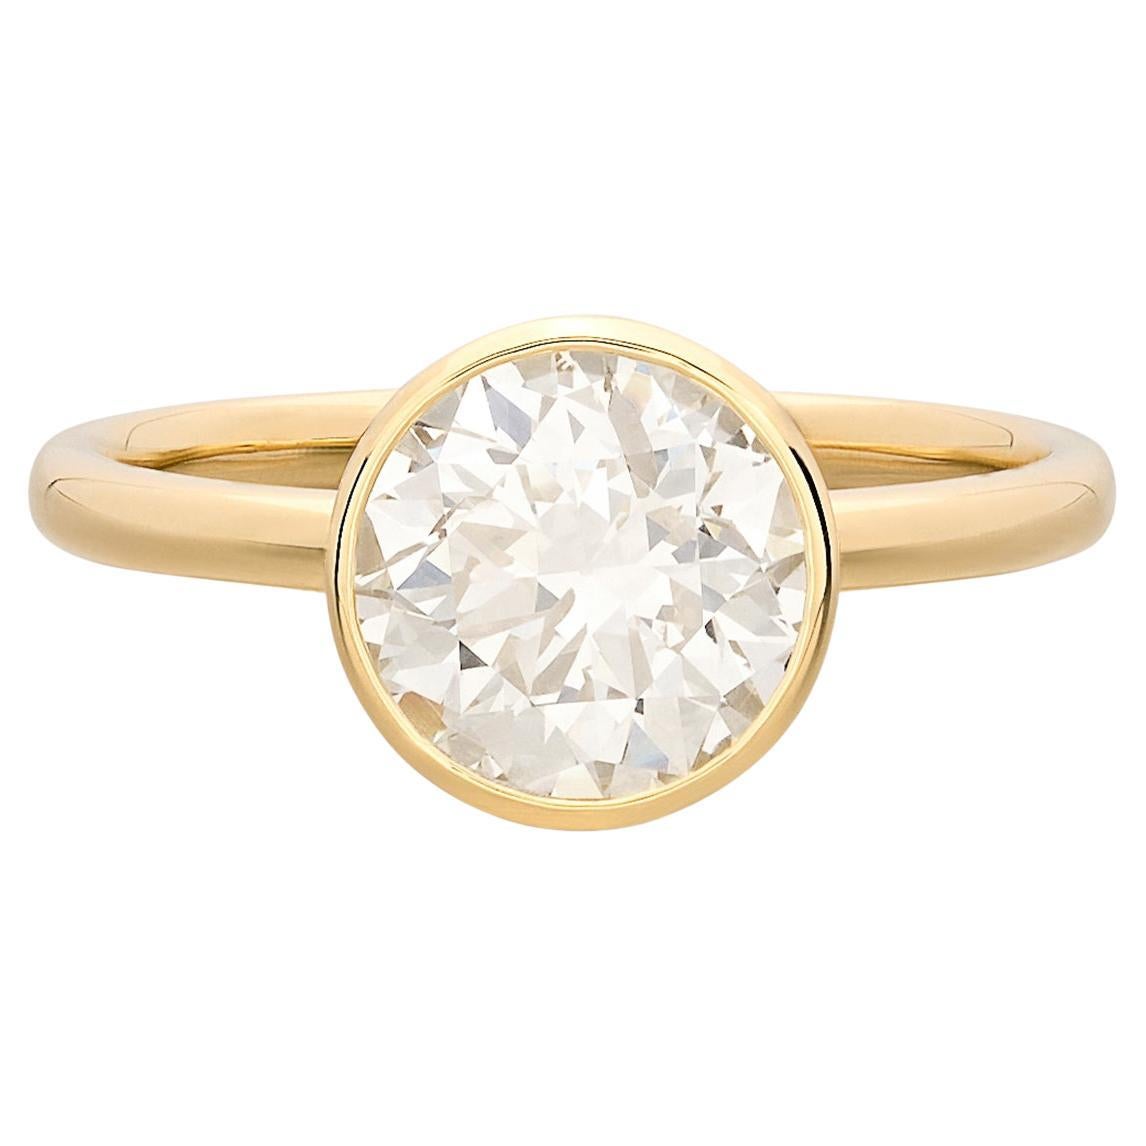 Exceptional 2.04ct Old European Cut Yellow Gold Diamond Ring